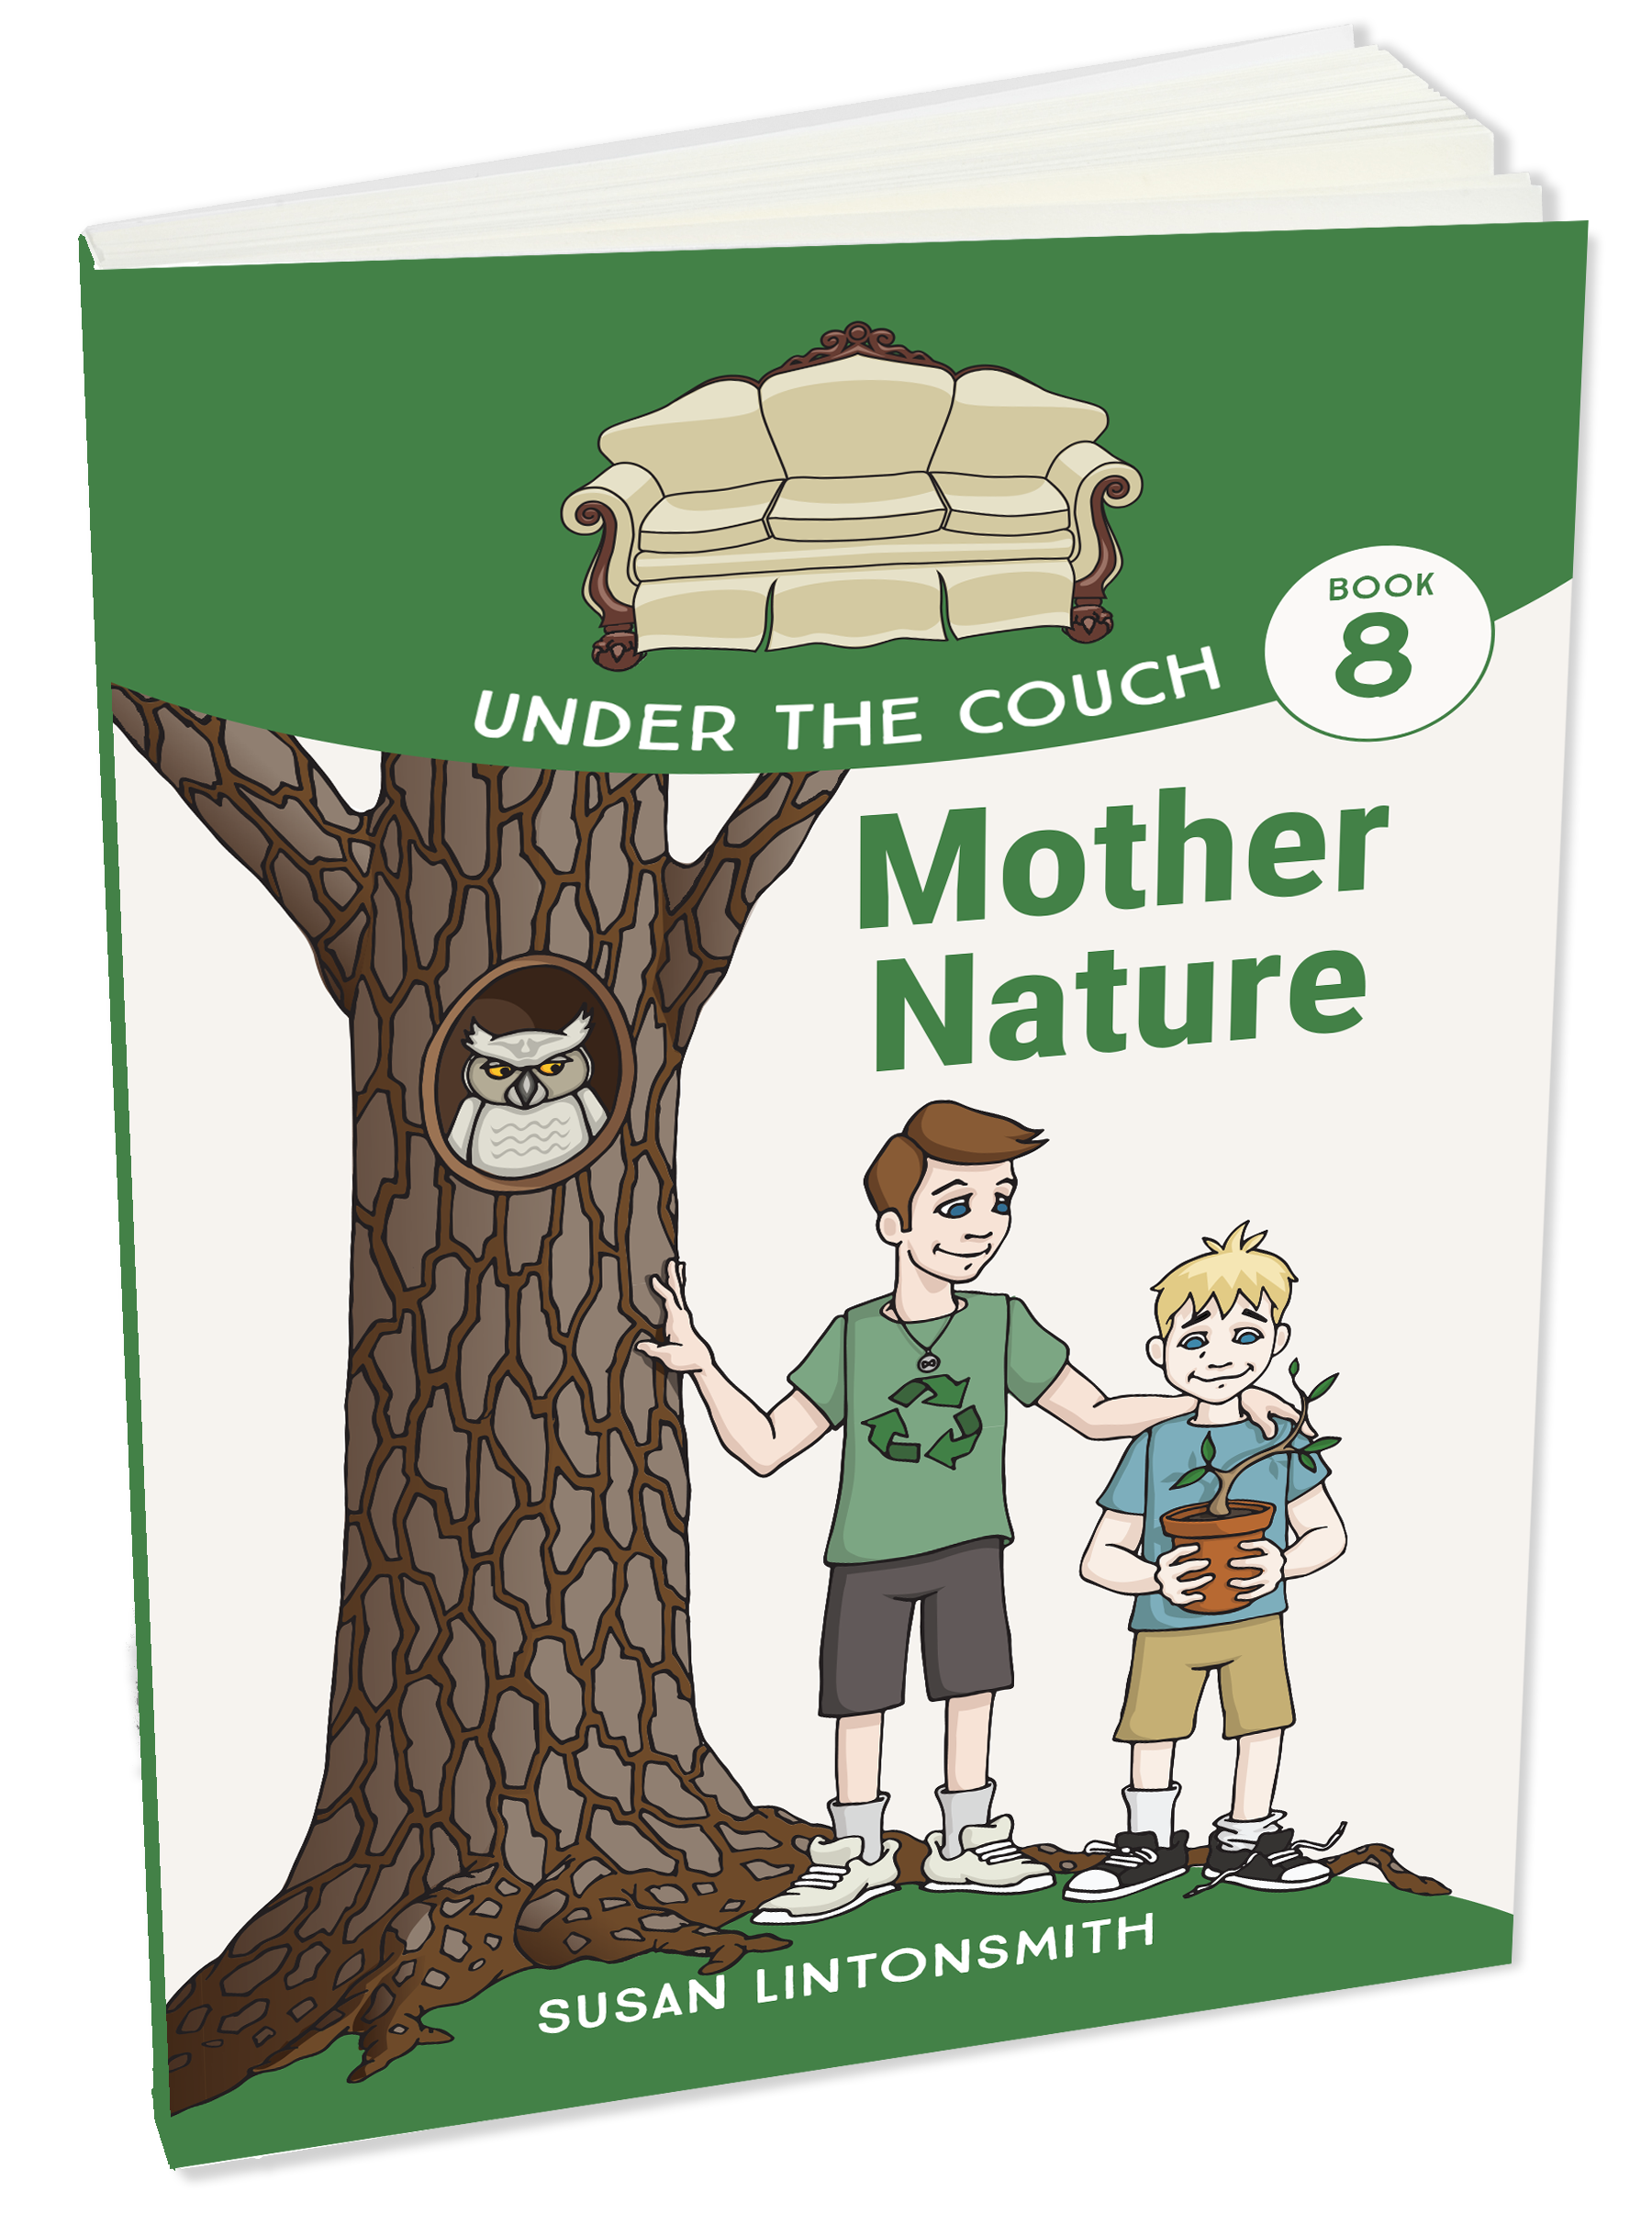 under the couch book eight mother nature susan lintonsmith